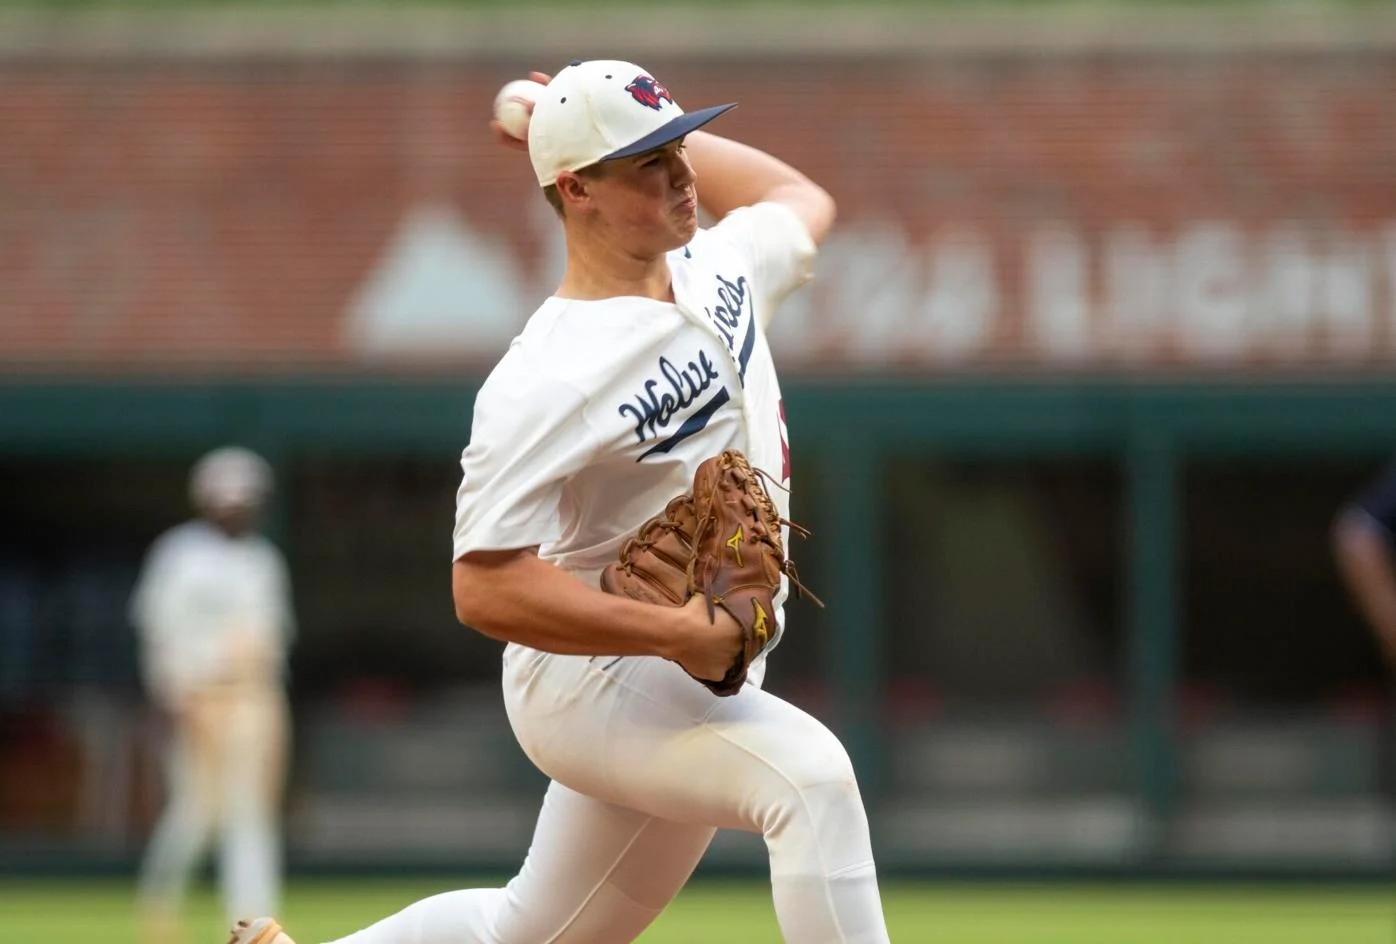 Woodstock Baseball Star Secures Appointment to U.S. Naval Academy